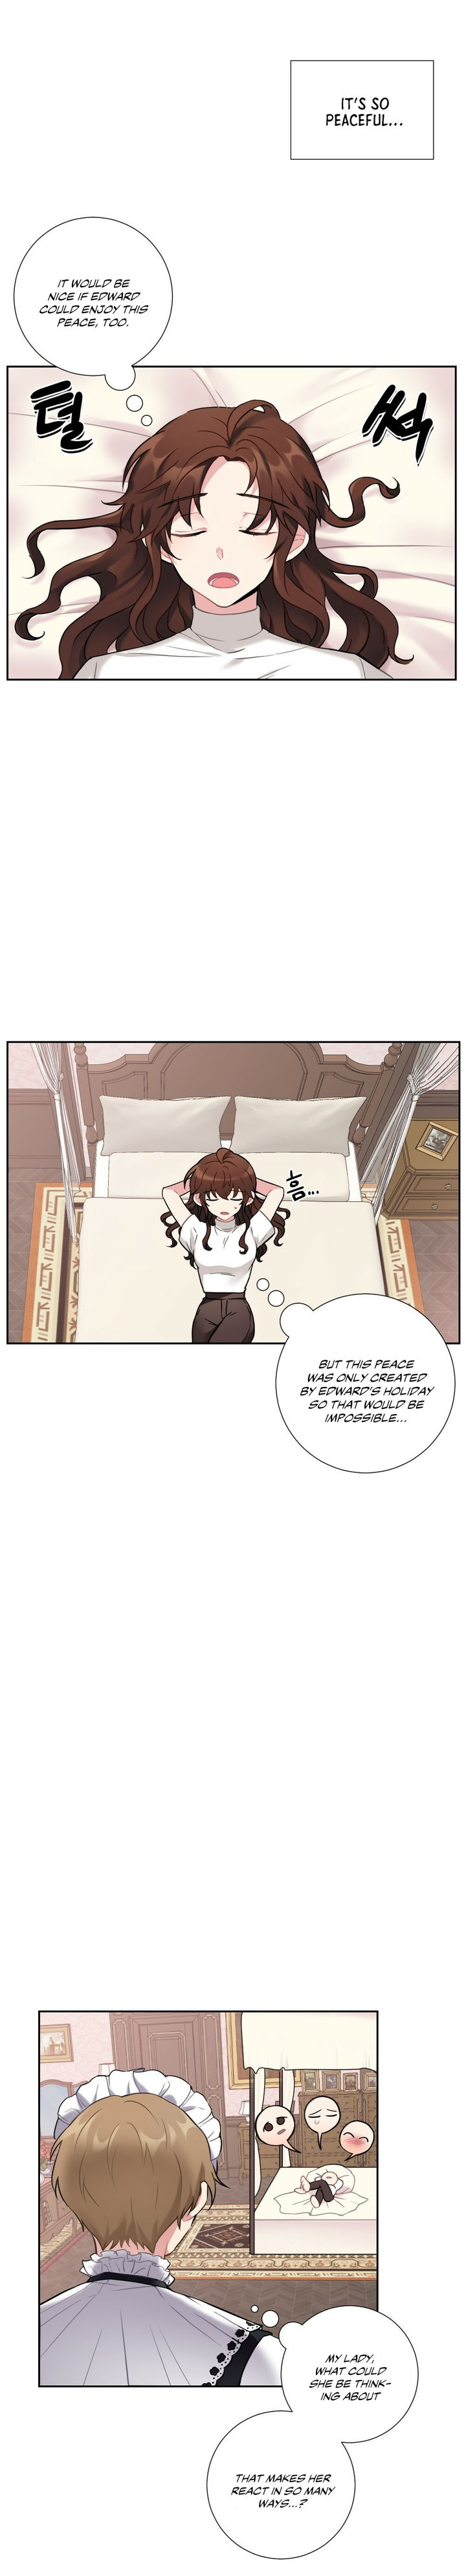 Lady & Maid - Chapter 15 Page 7